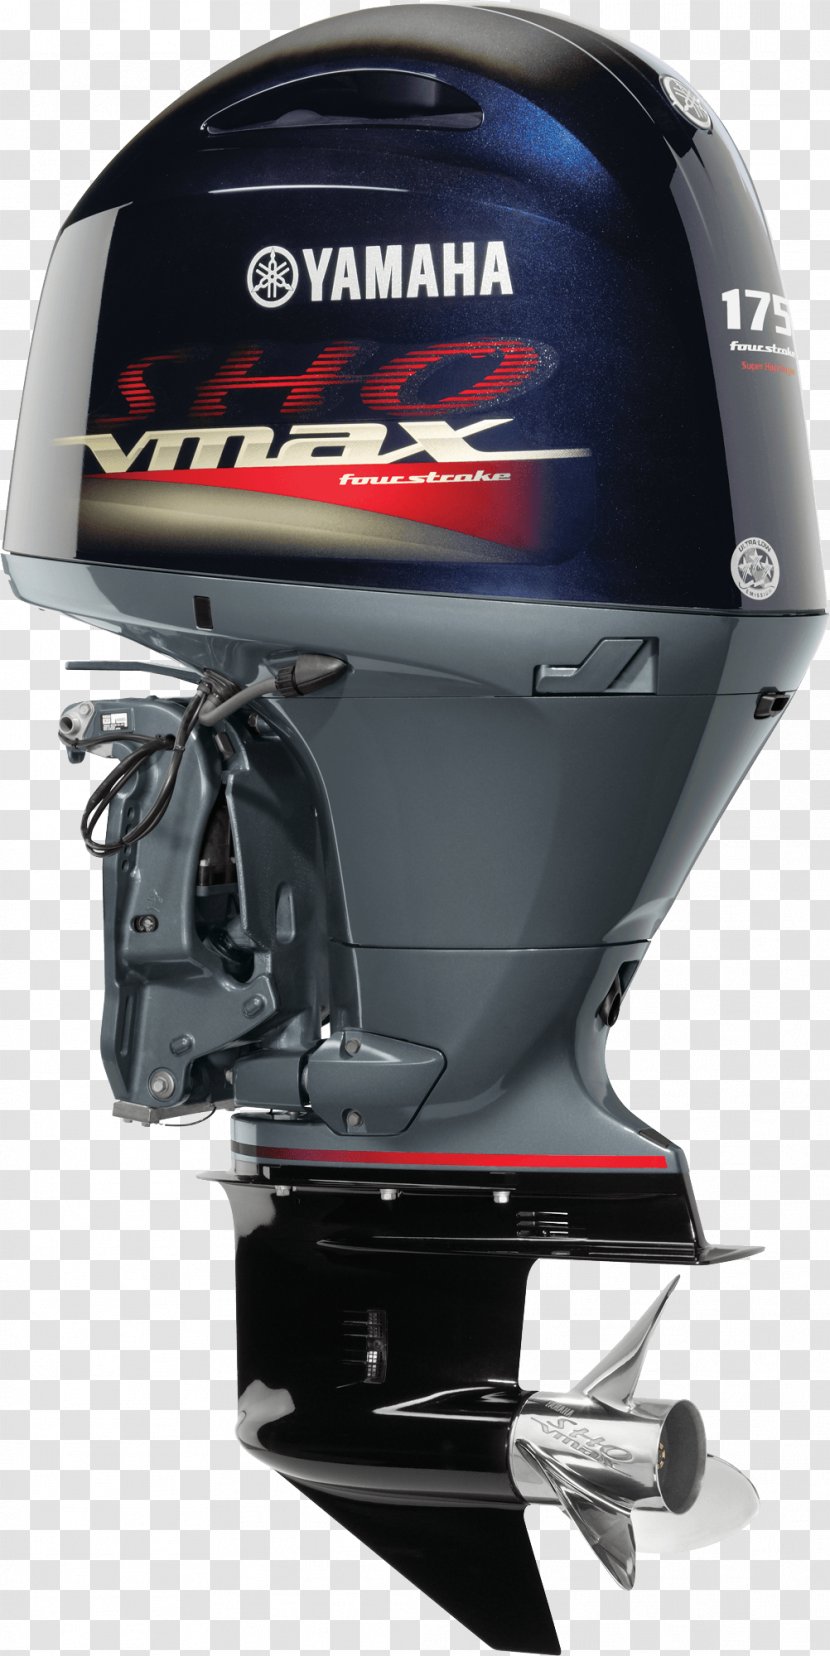 Yamaha Motor Company Outboard VMAX Four-stroke Engine - V6 Transparent PNG